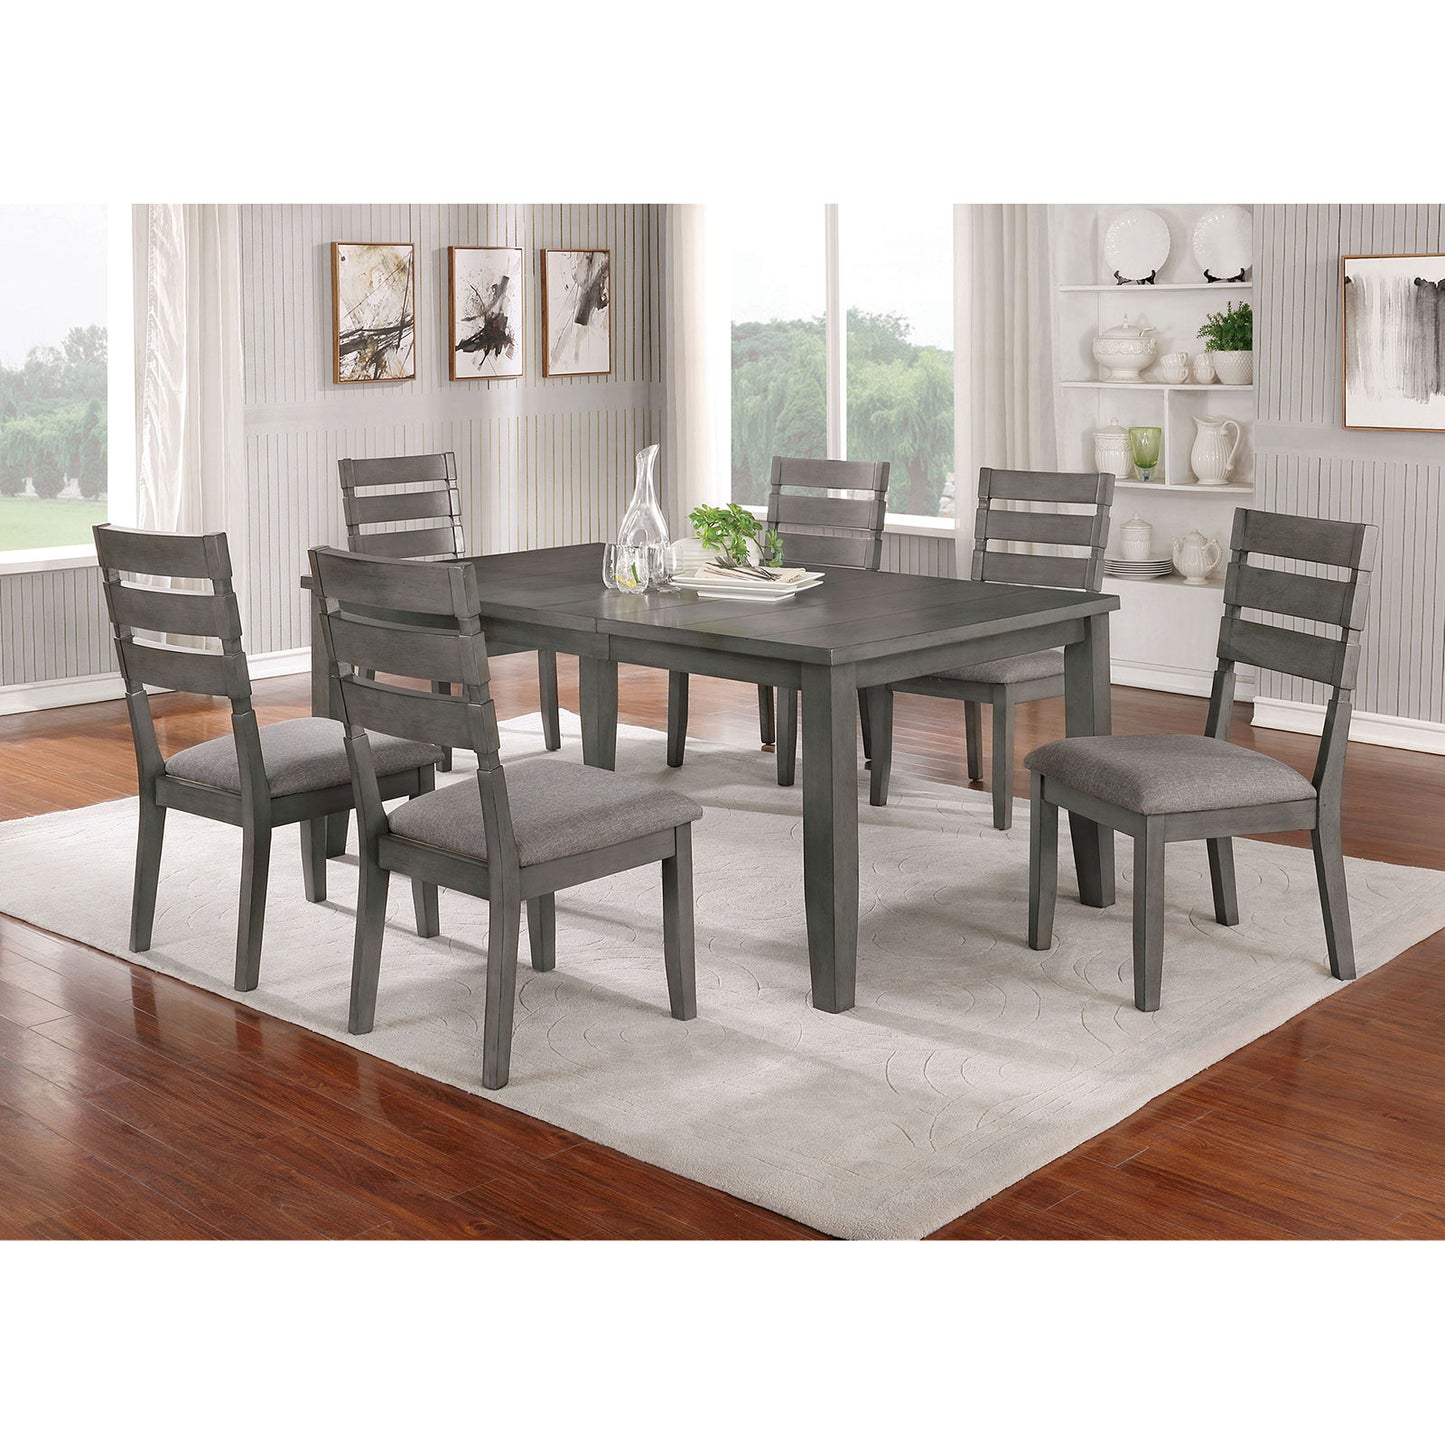 Furniture of America VIANA 7 Pc. Dining Table Set